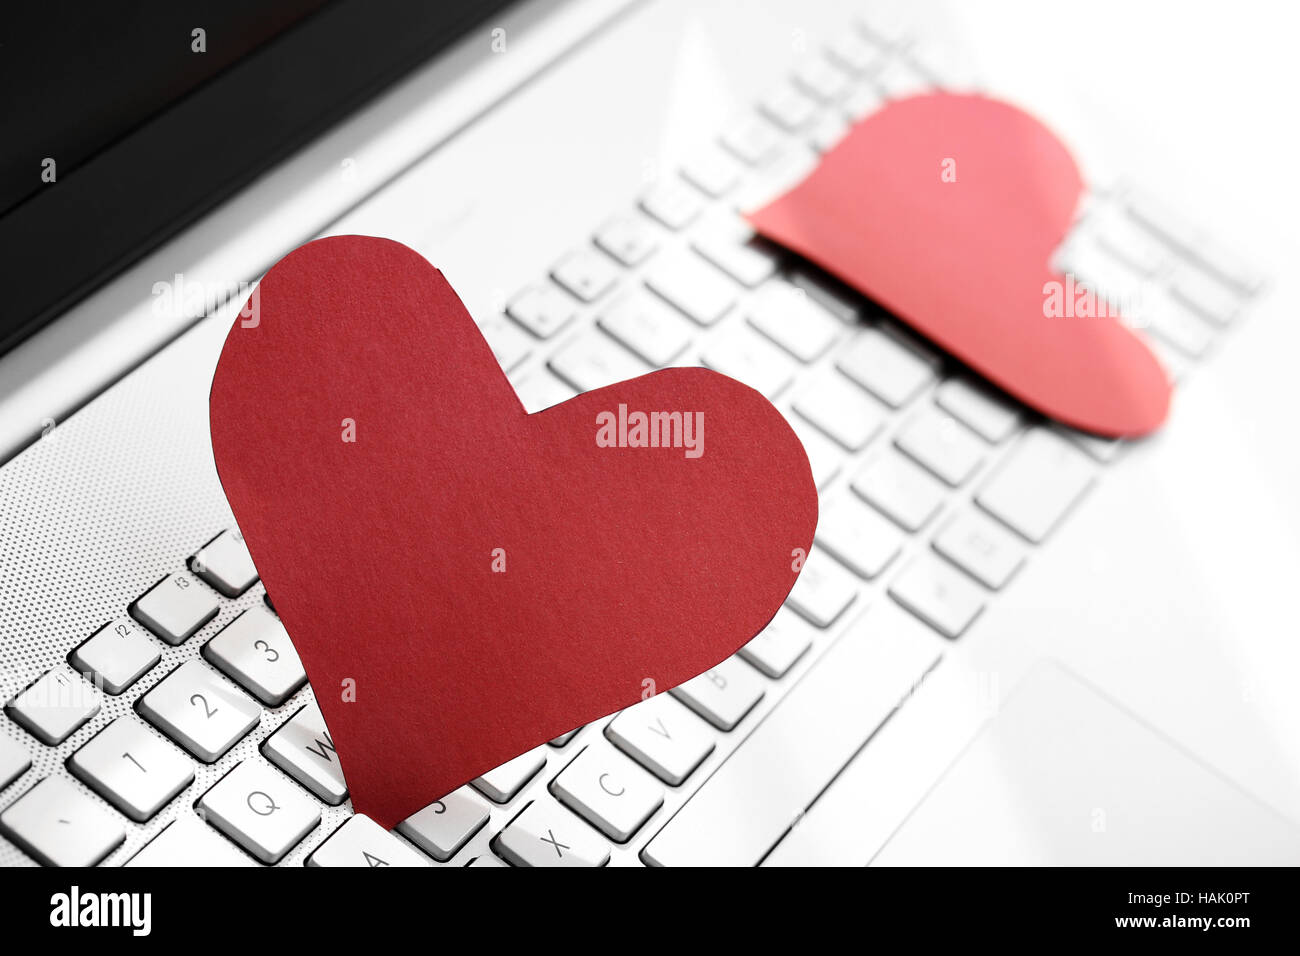 internet dating concept - two paper hearts on computer keyboard Stock Photo